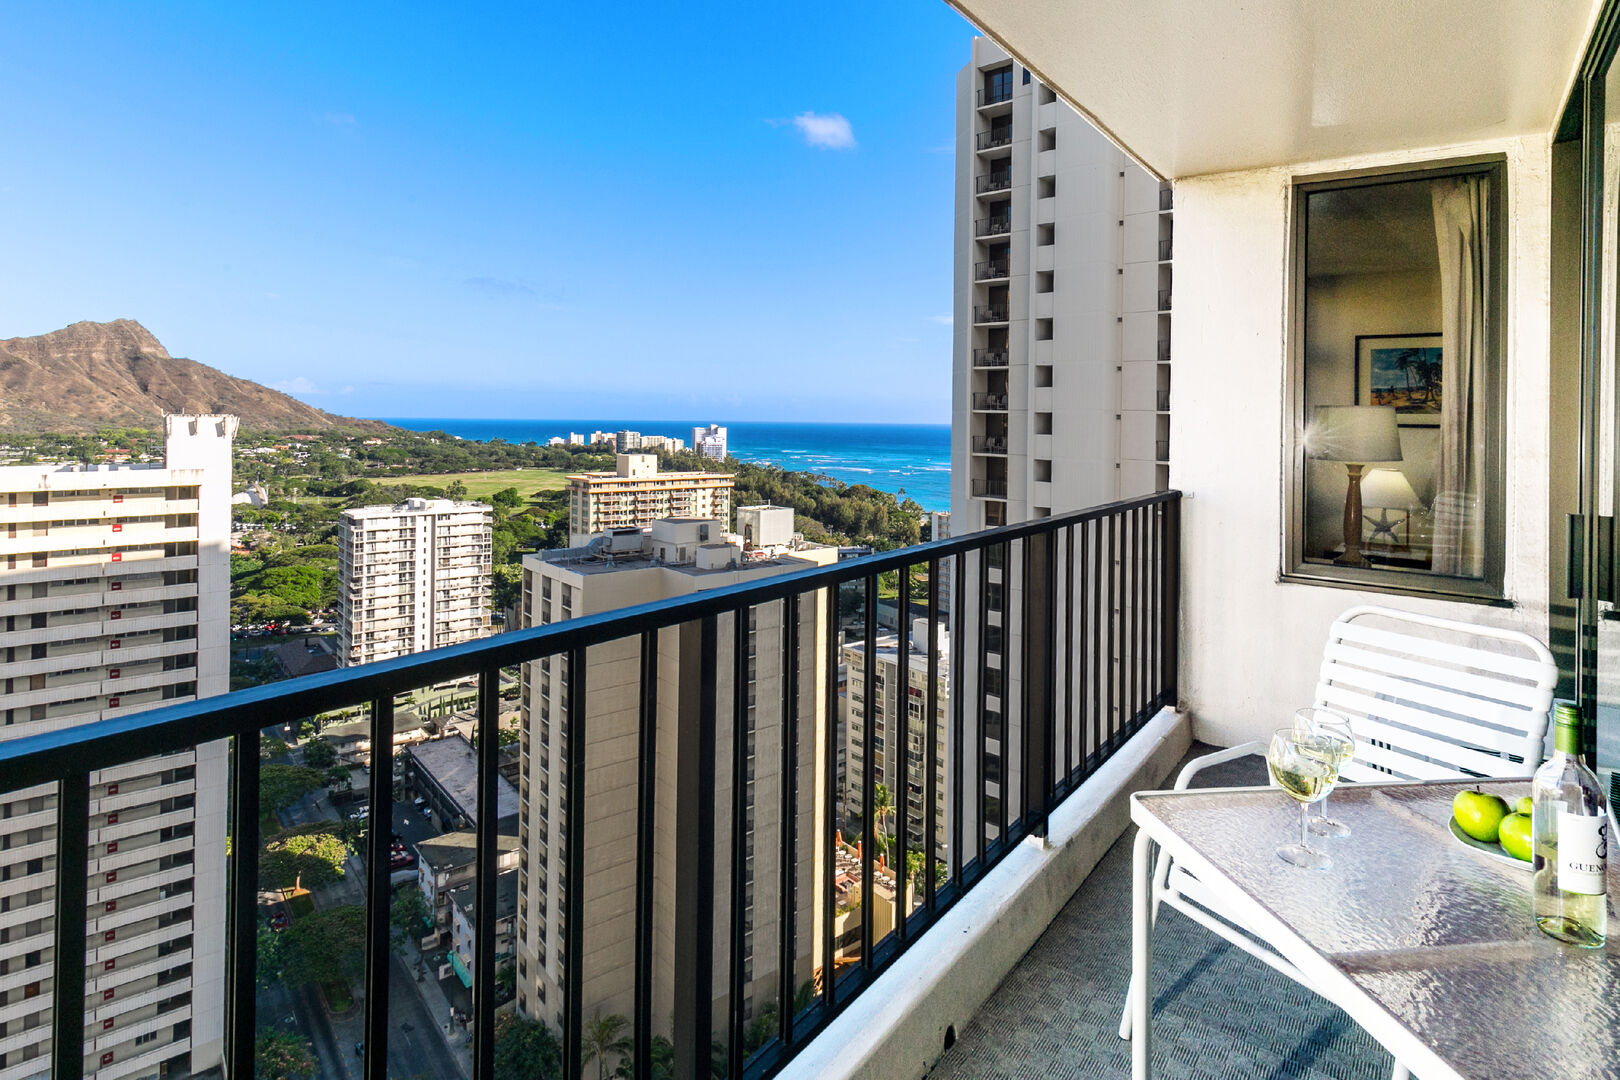 Relax and have your coffee on your balcony with these stunning ocean and diamond-head views!